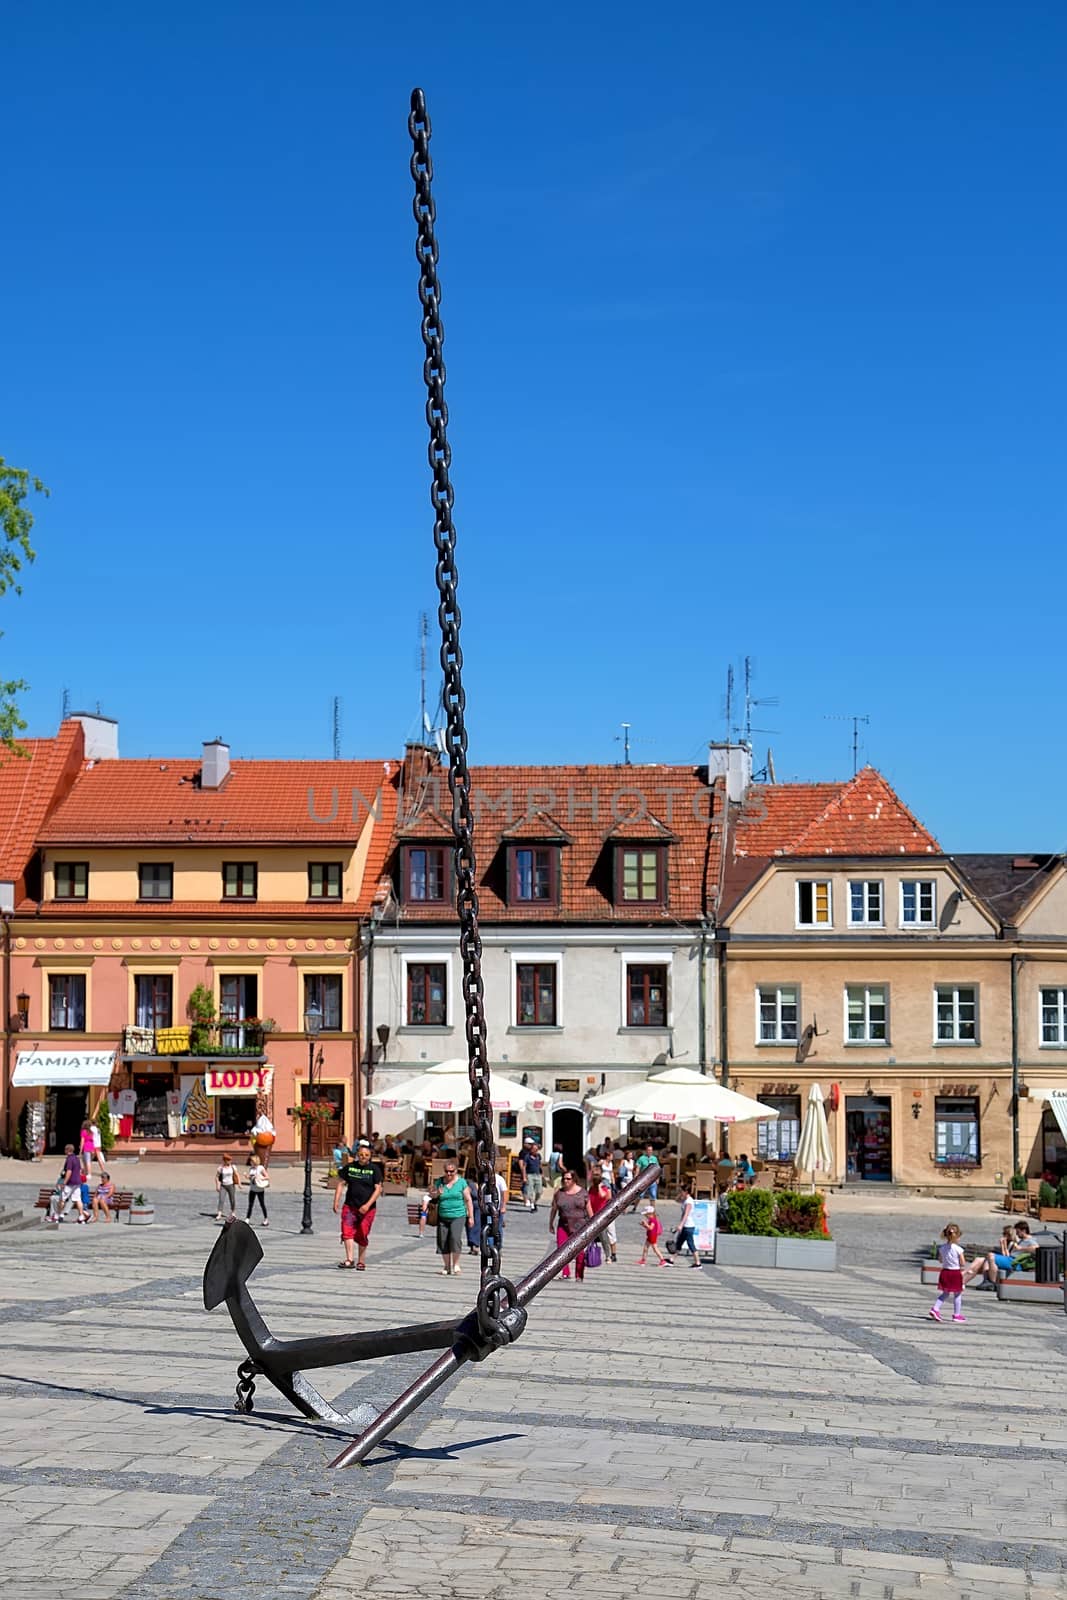 Sculpture Anchor heaven in the Old Town of Sandomierz in Poland by johan10